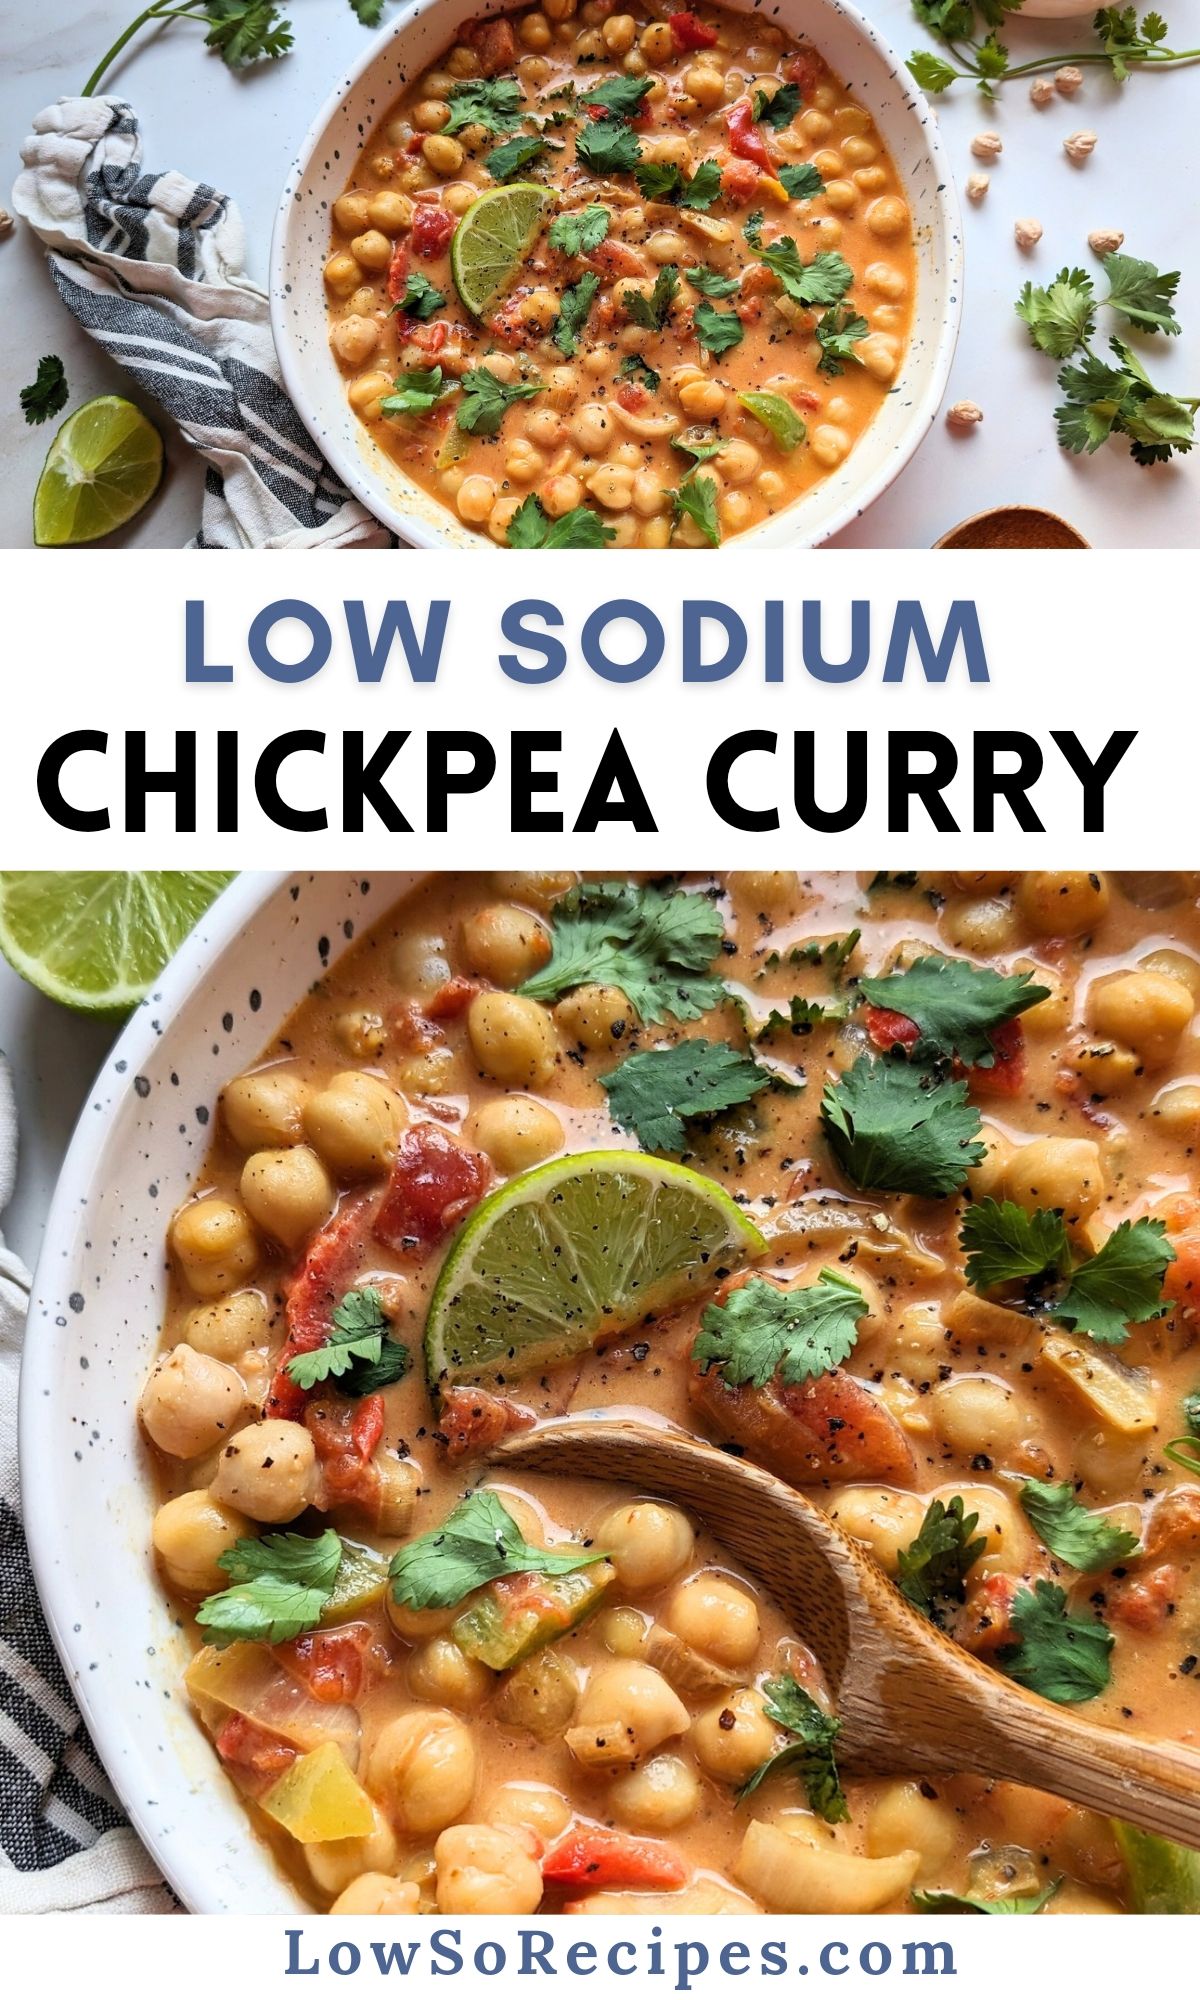 low sodium chickpea curry recipe easy low salt indian recipes thai inspired curry without salt easy dinner ideas with chickpeas